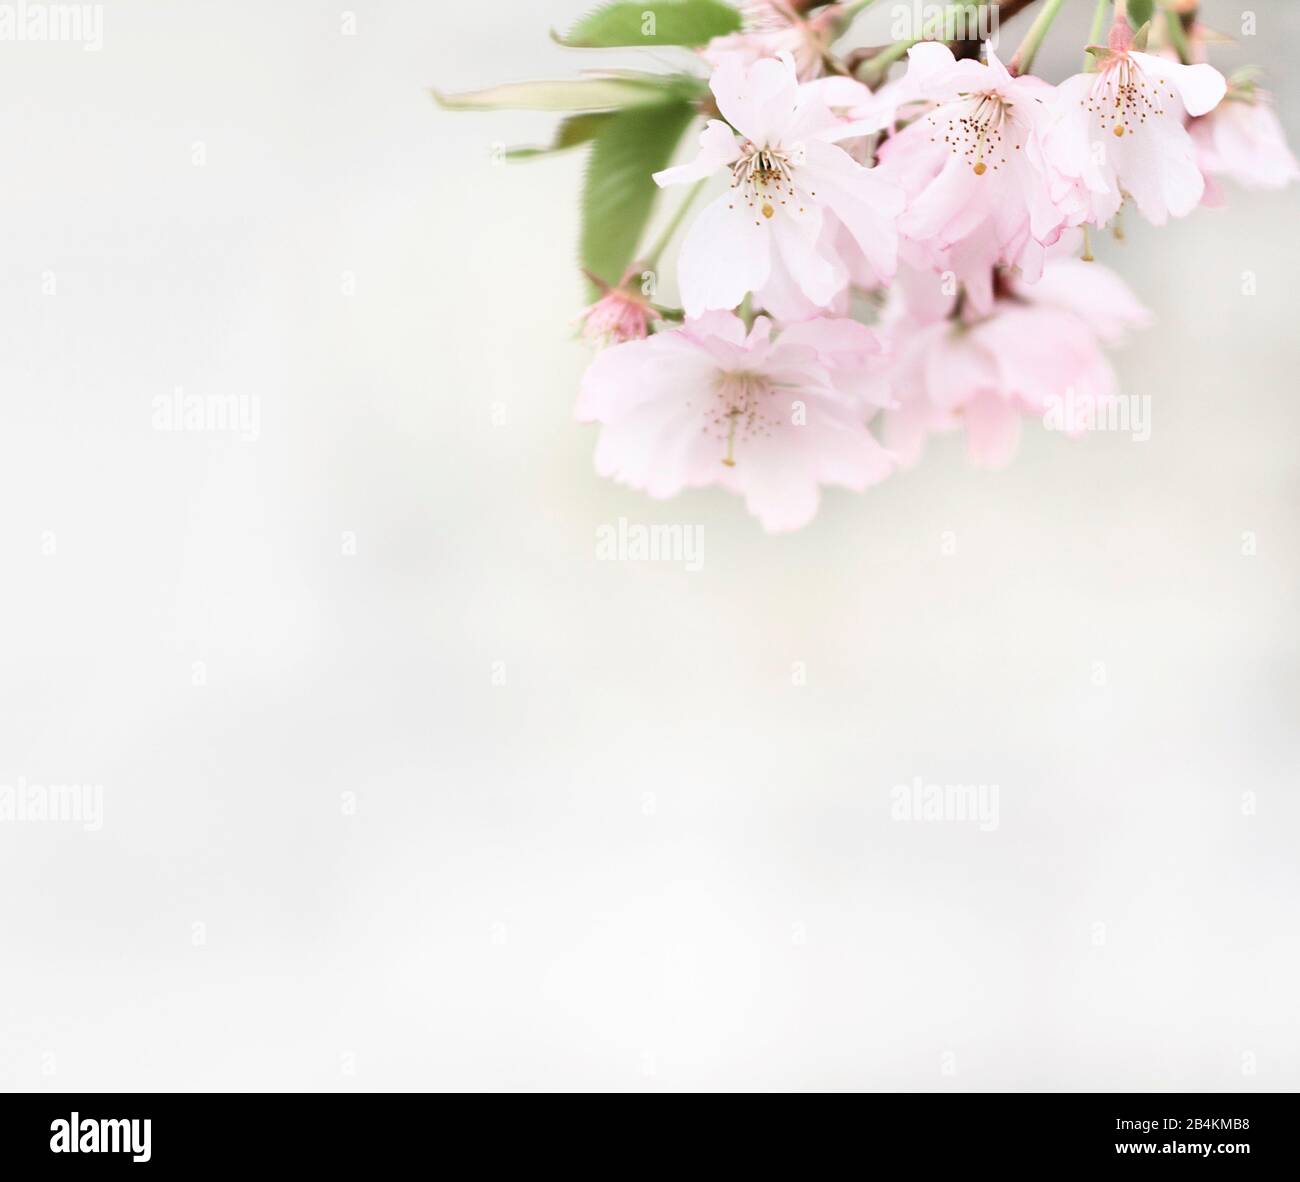 Nature details, flower branch Stock Photo